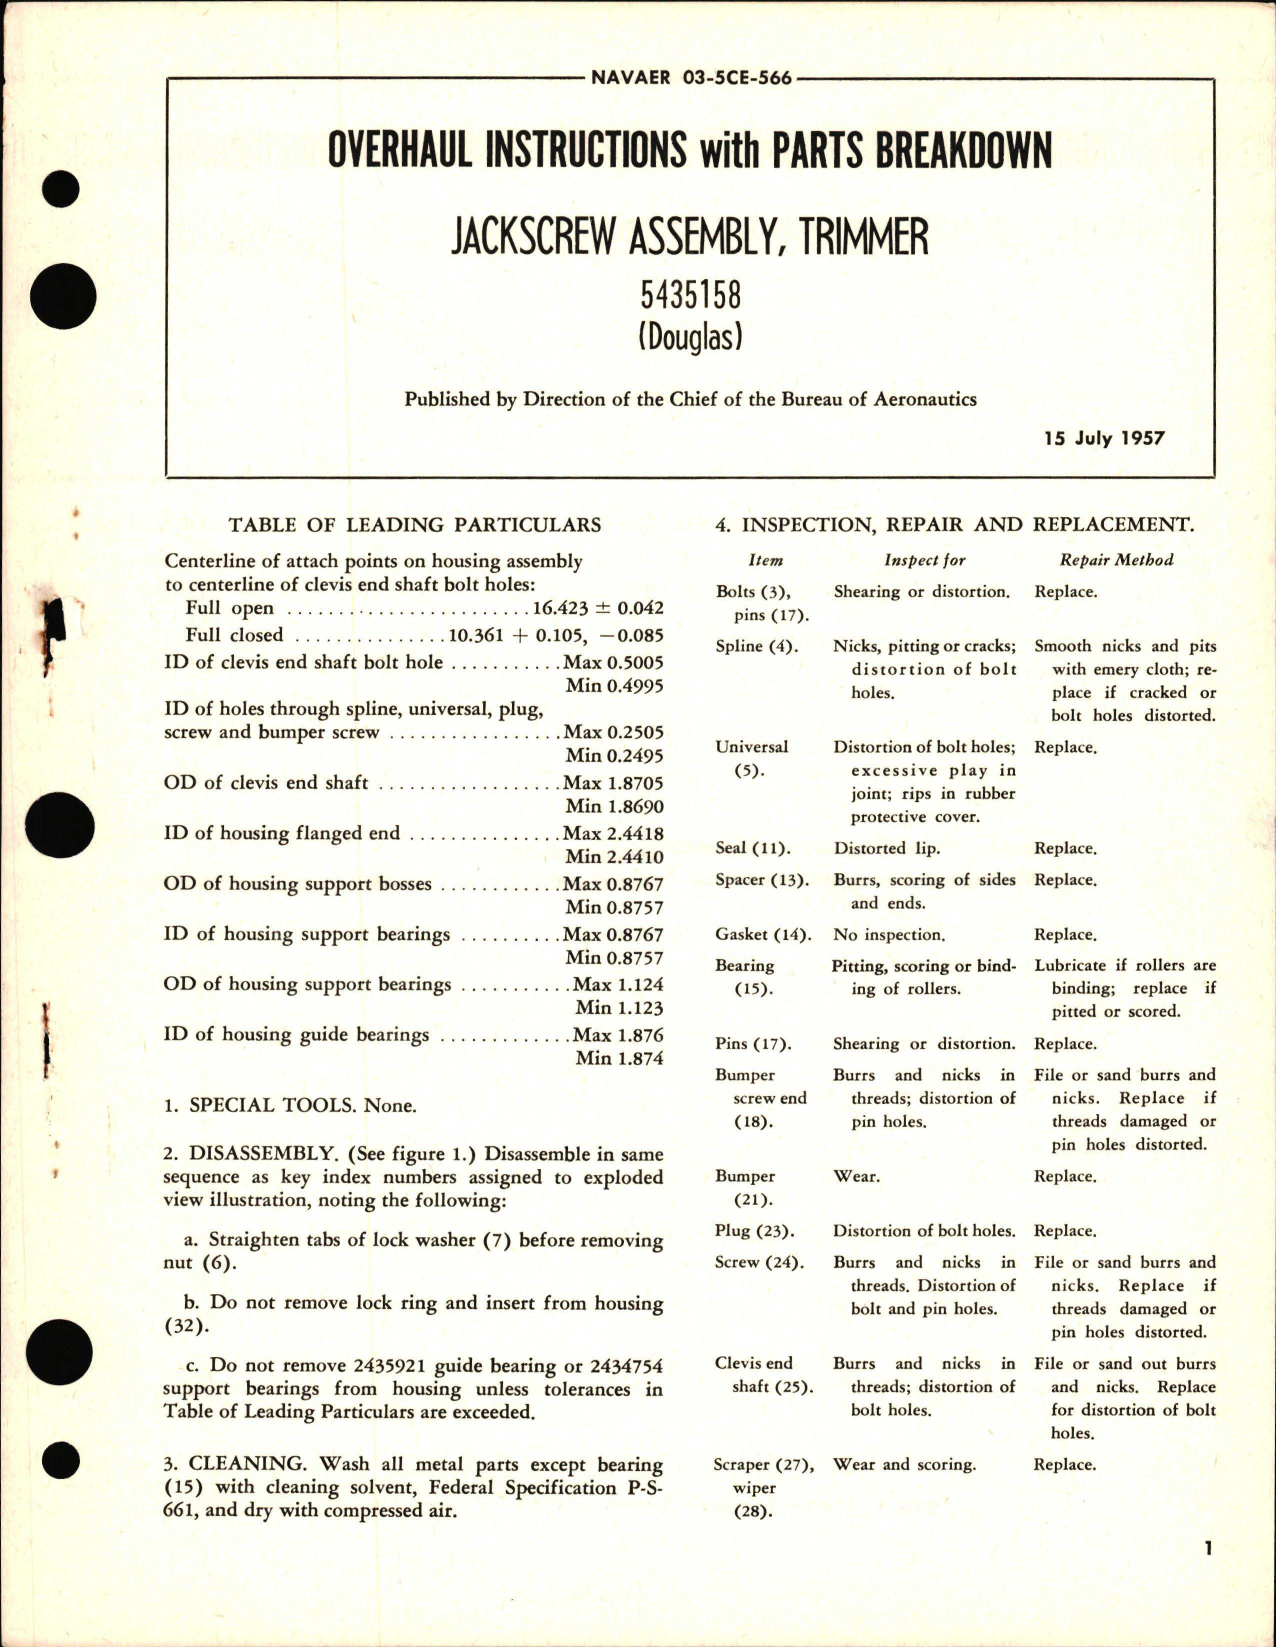 Sample page 1 from AirCorps Library document: Overhaul Instructions with Parts Breakdown for Jackscrew Assembly, Trimmer 5435158